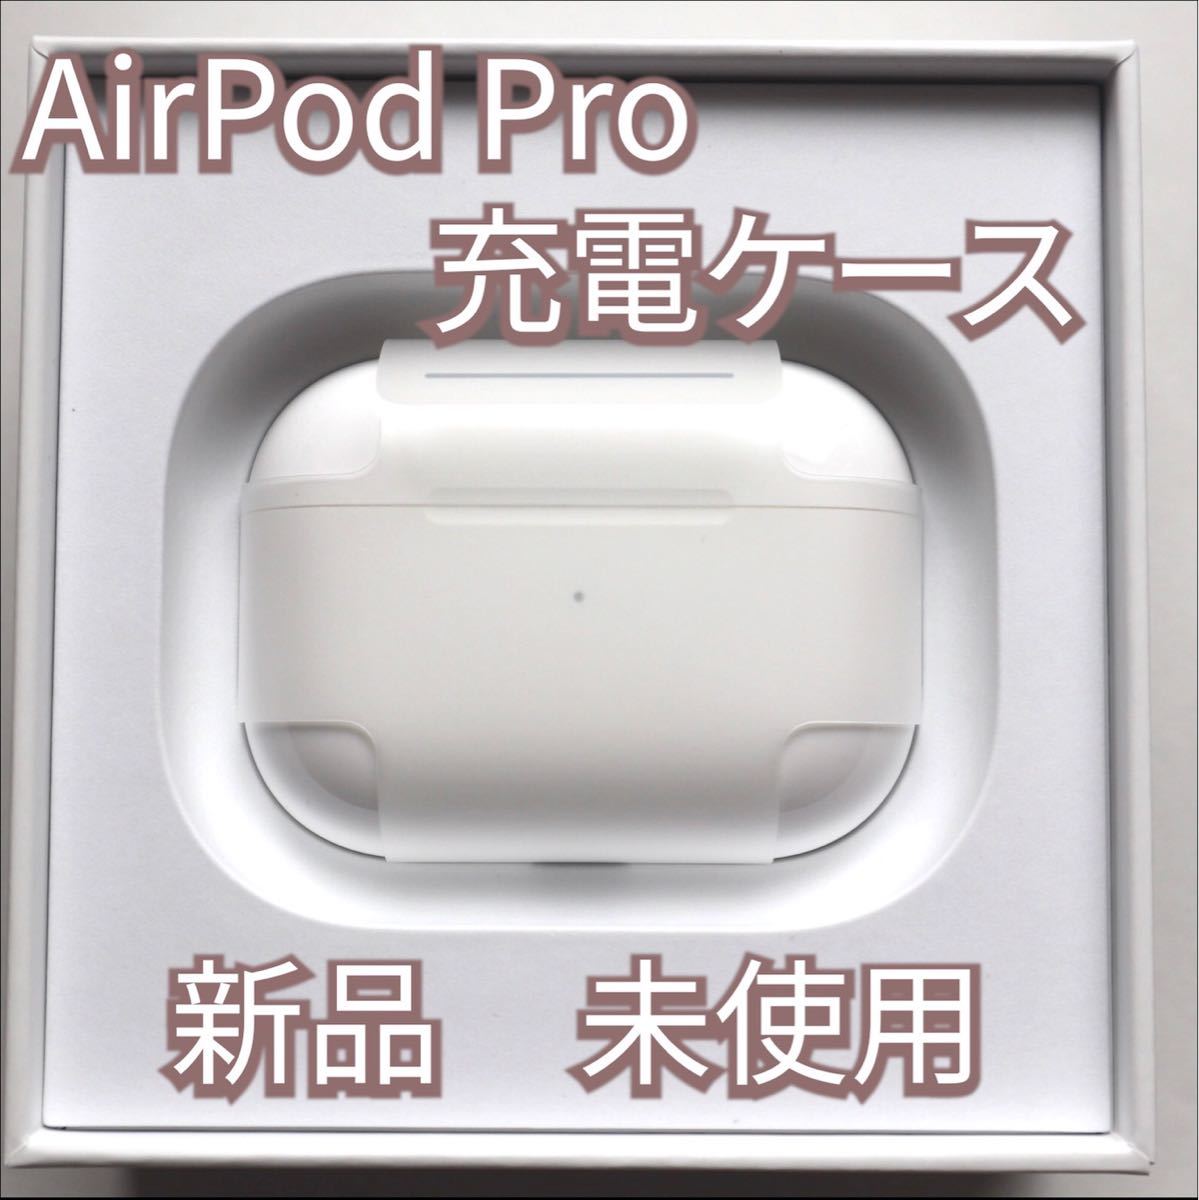 54%OFF!】 新品未使用 AirPods Pro MWP22J A 充電ケース 充電器 のみ